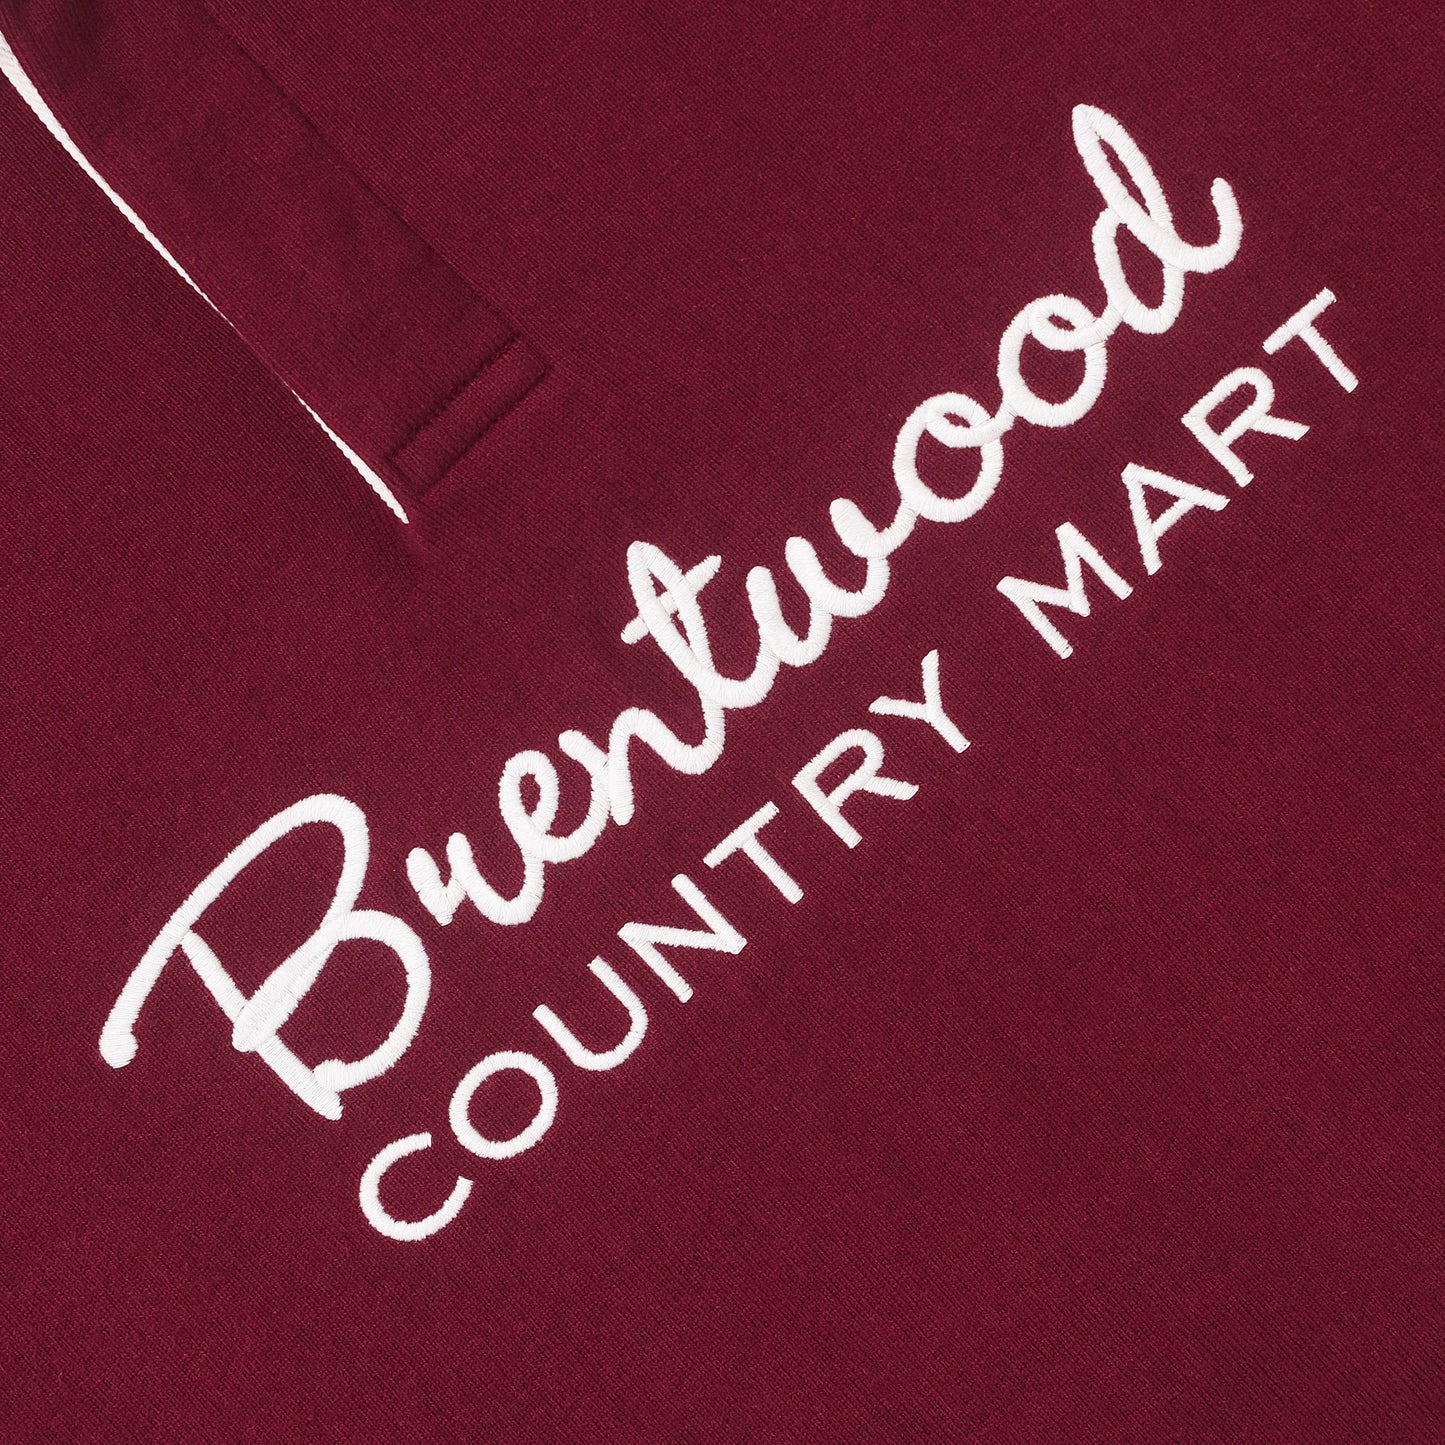 Brentwood Country Mart Rugby